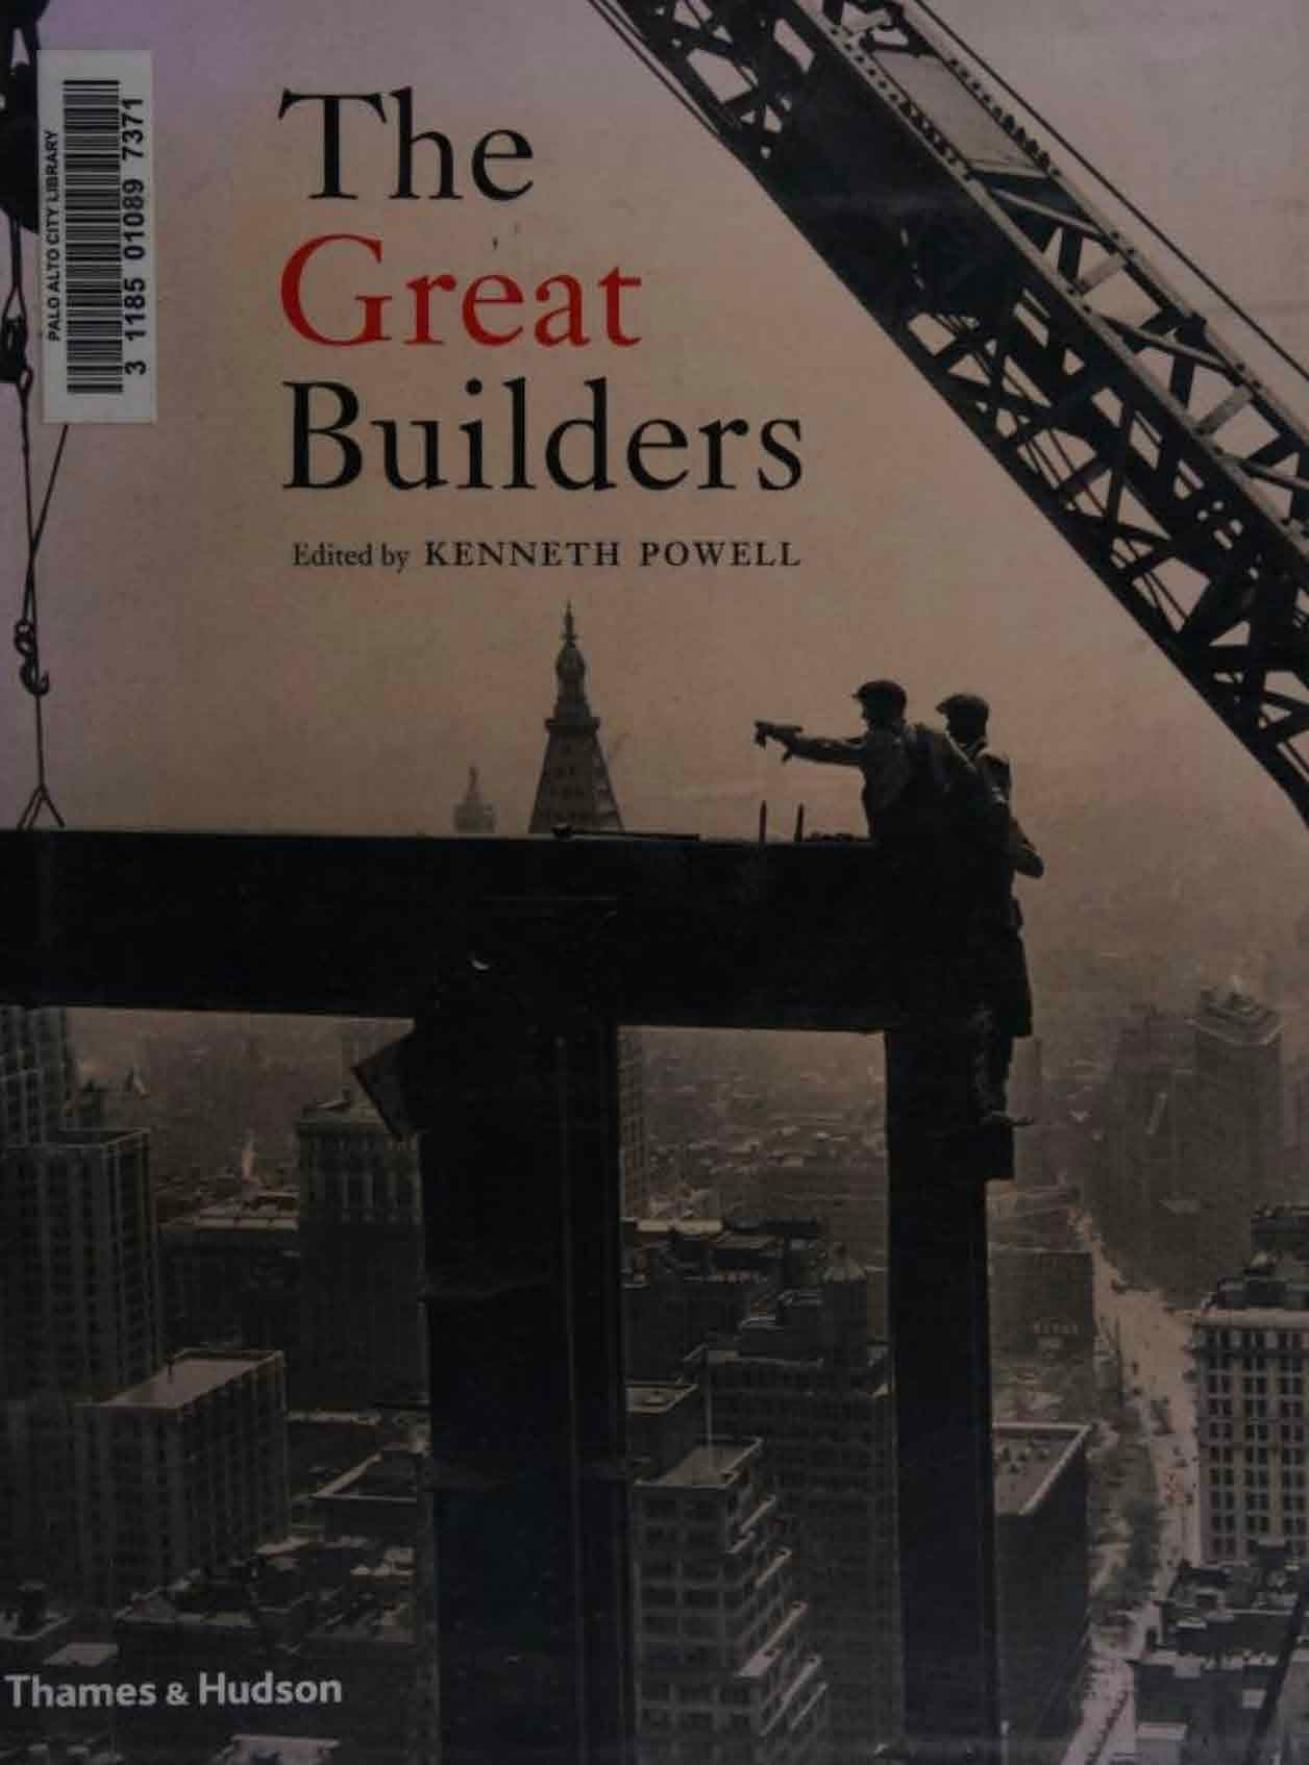 The Great Builders by Kenneth Powell (editor)